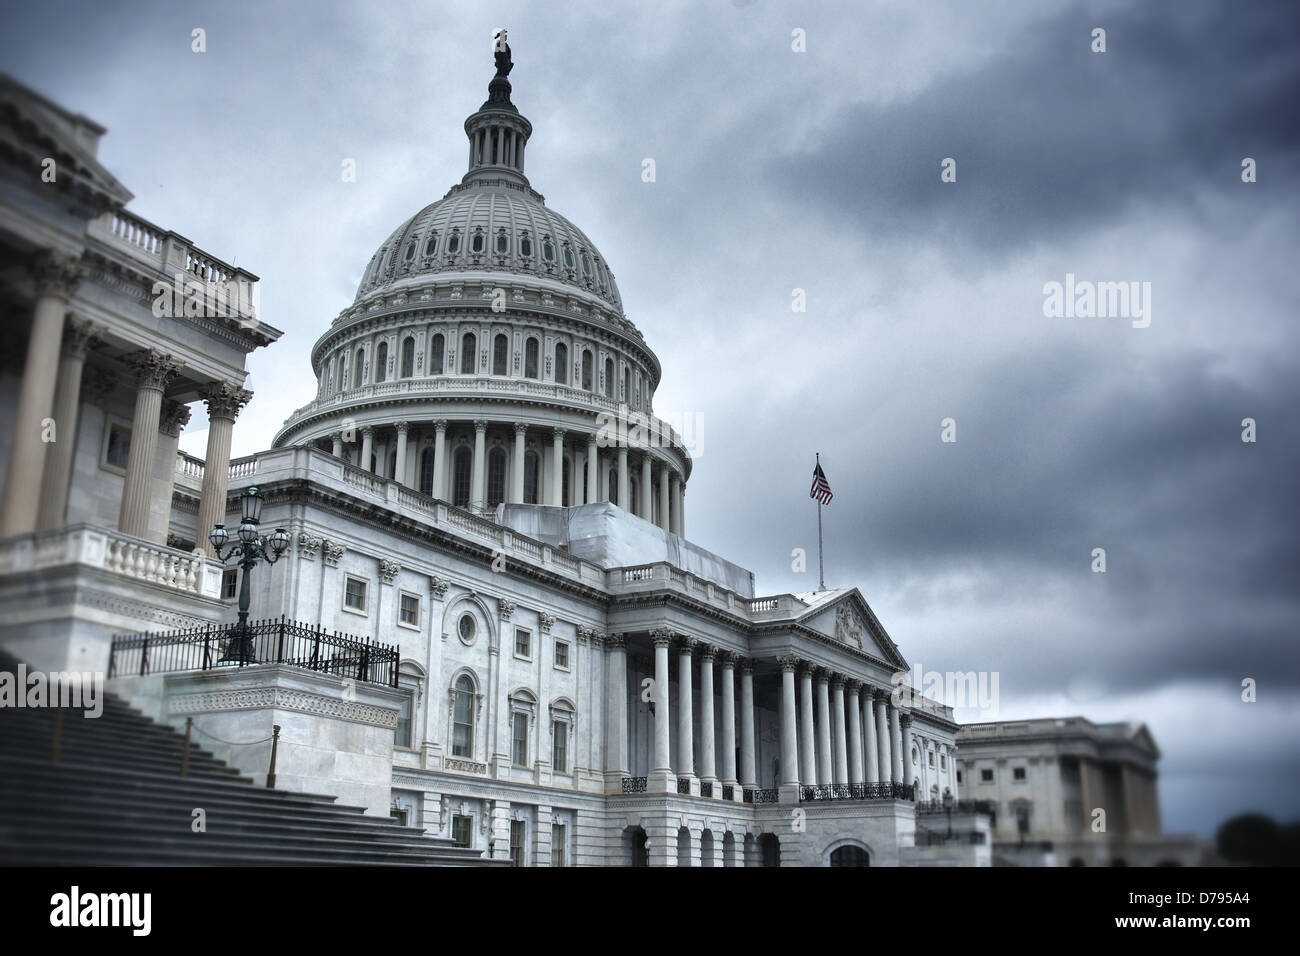 United States Capitol Building stands under a dark cloudy sky. Stock Photo